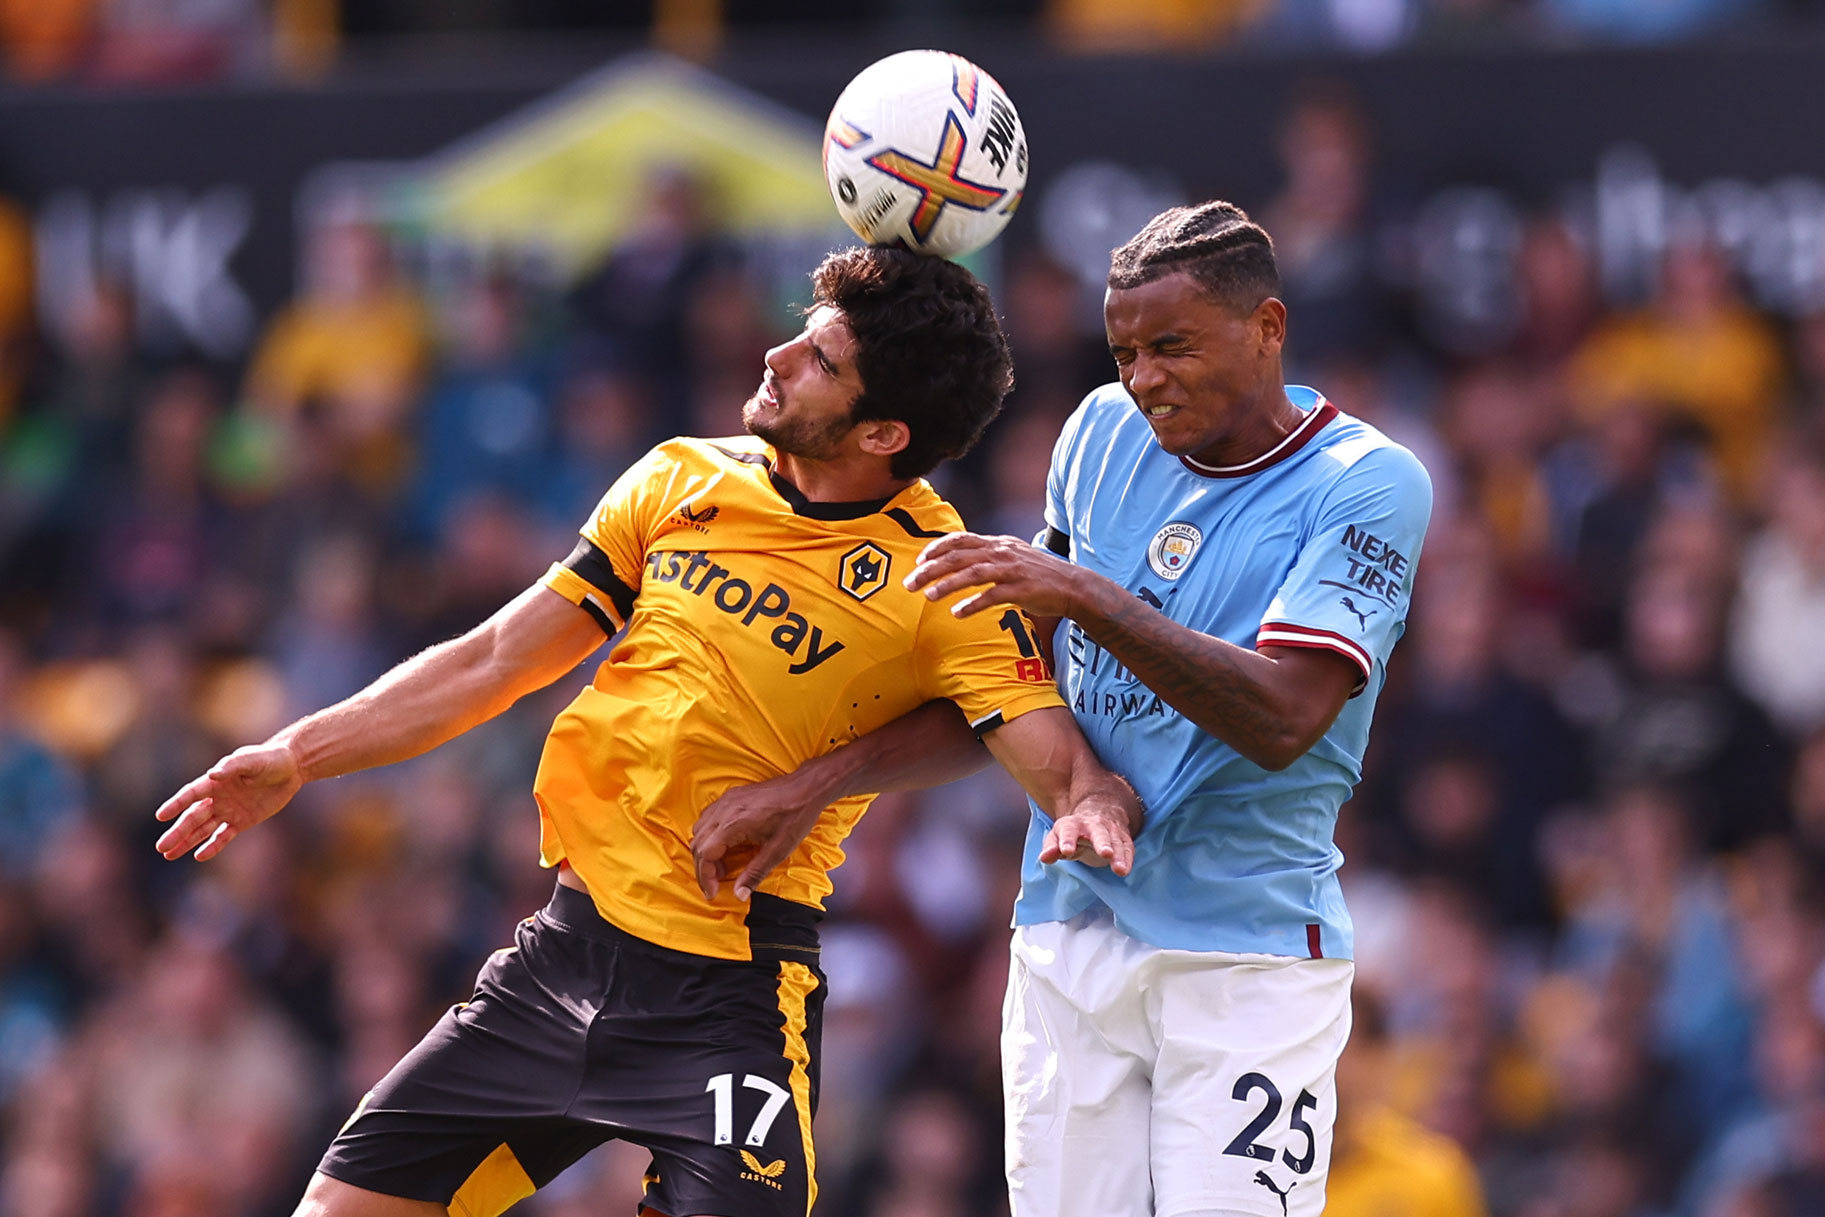 Goncalo Guedes of Wolverhampton Wanderers wins a header against Manuel Akanji of Manchester City